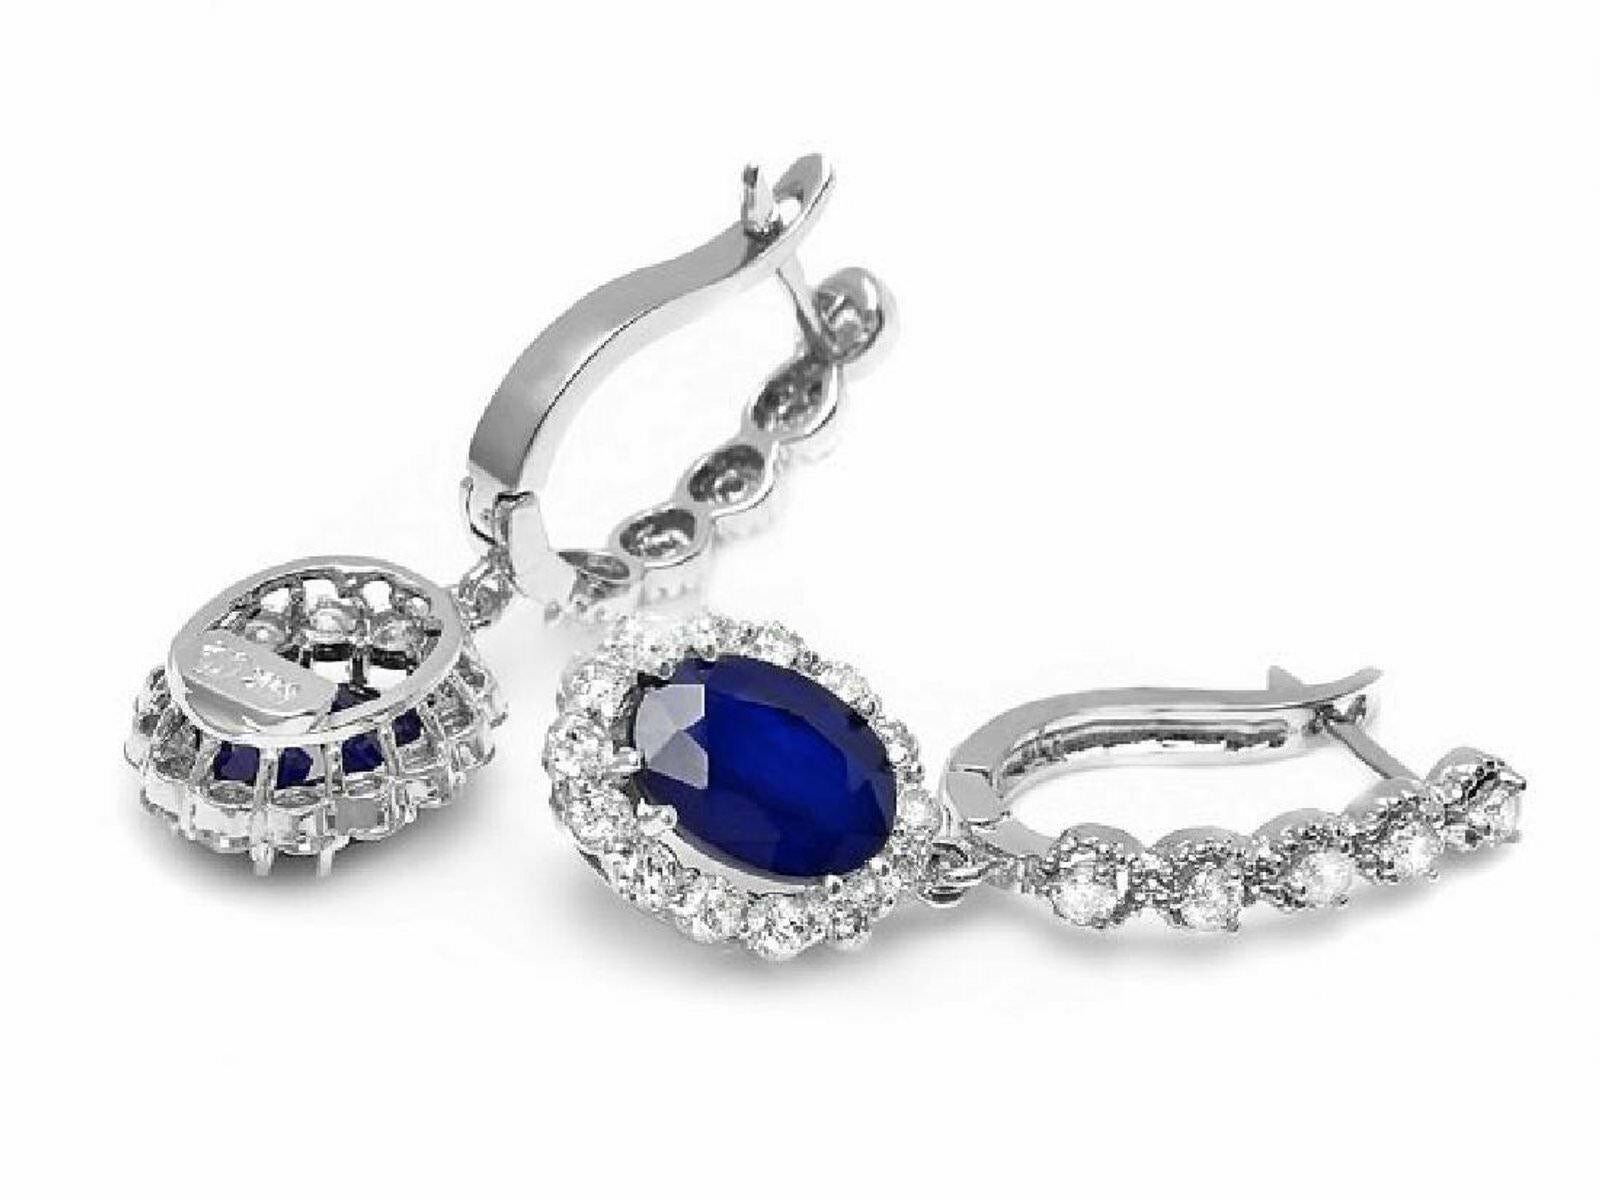 Exquisite 5.80 Carats Natural Sapphire and Diamond 14K Solid White Gold Earrings

Amazing looking piece!

Total Natural Round Cut White Diamonds Weight: Approx. 1.30 Carats (color G-H / Clarity SI1-SI2)

Total Natural Oval Cut Sapphires Weight: